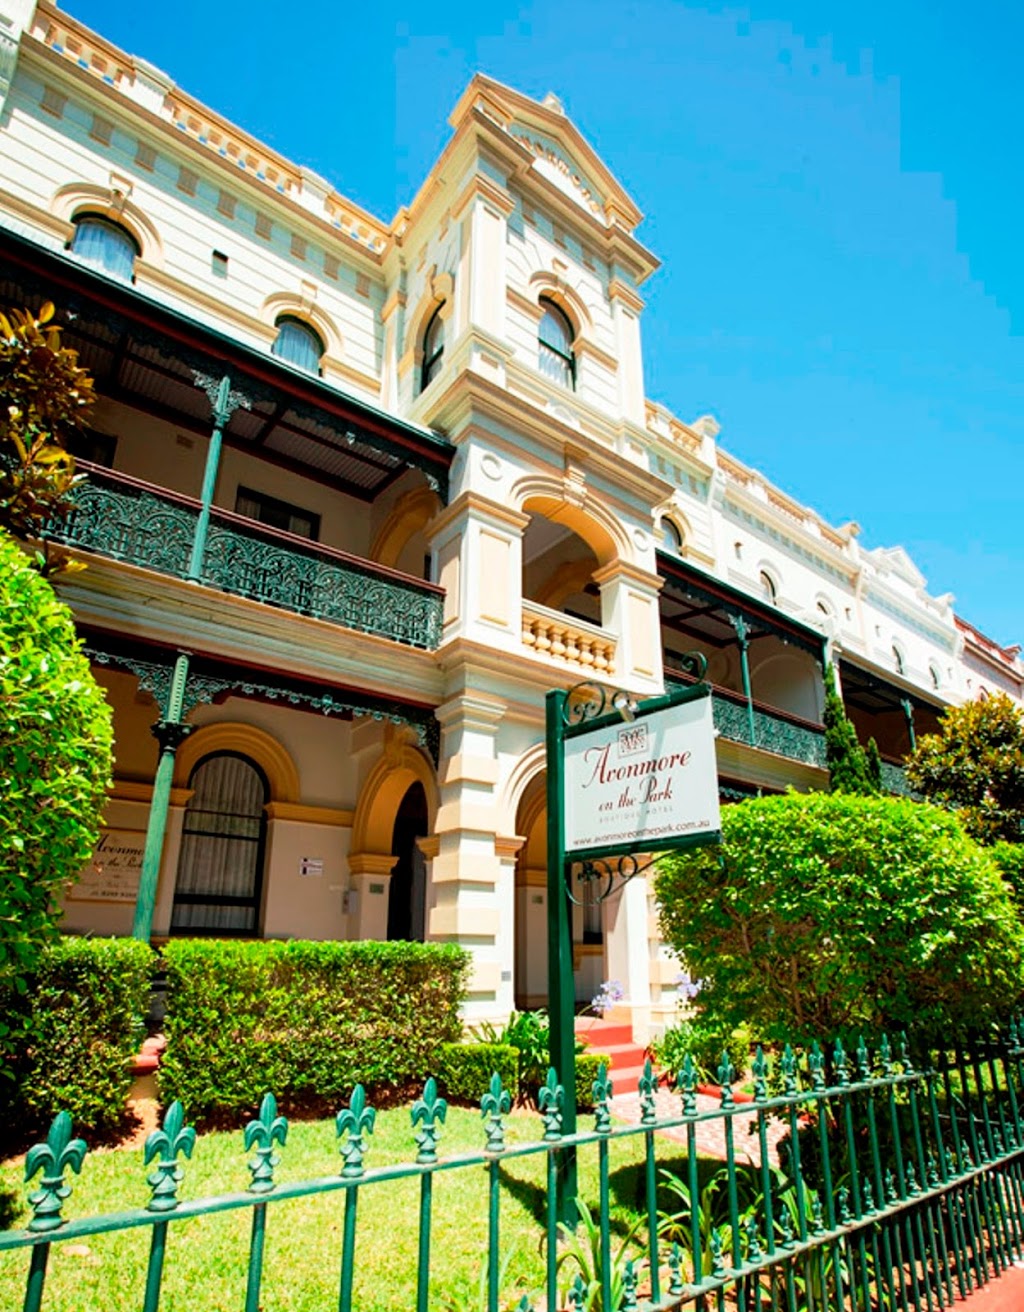 Avonmore on the Park Boutique Hotel | lodging | 34 The Avenue, Randwick NSW 2031, Australia | 0293999388 OR +61 2 9399 9388